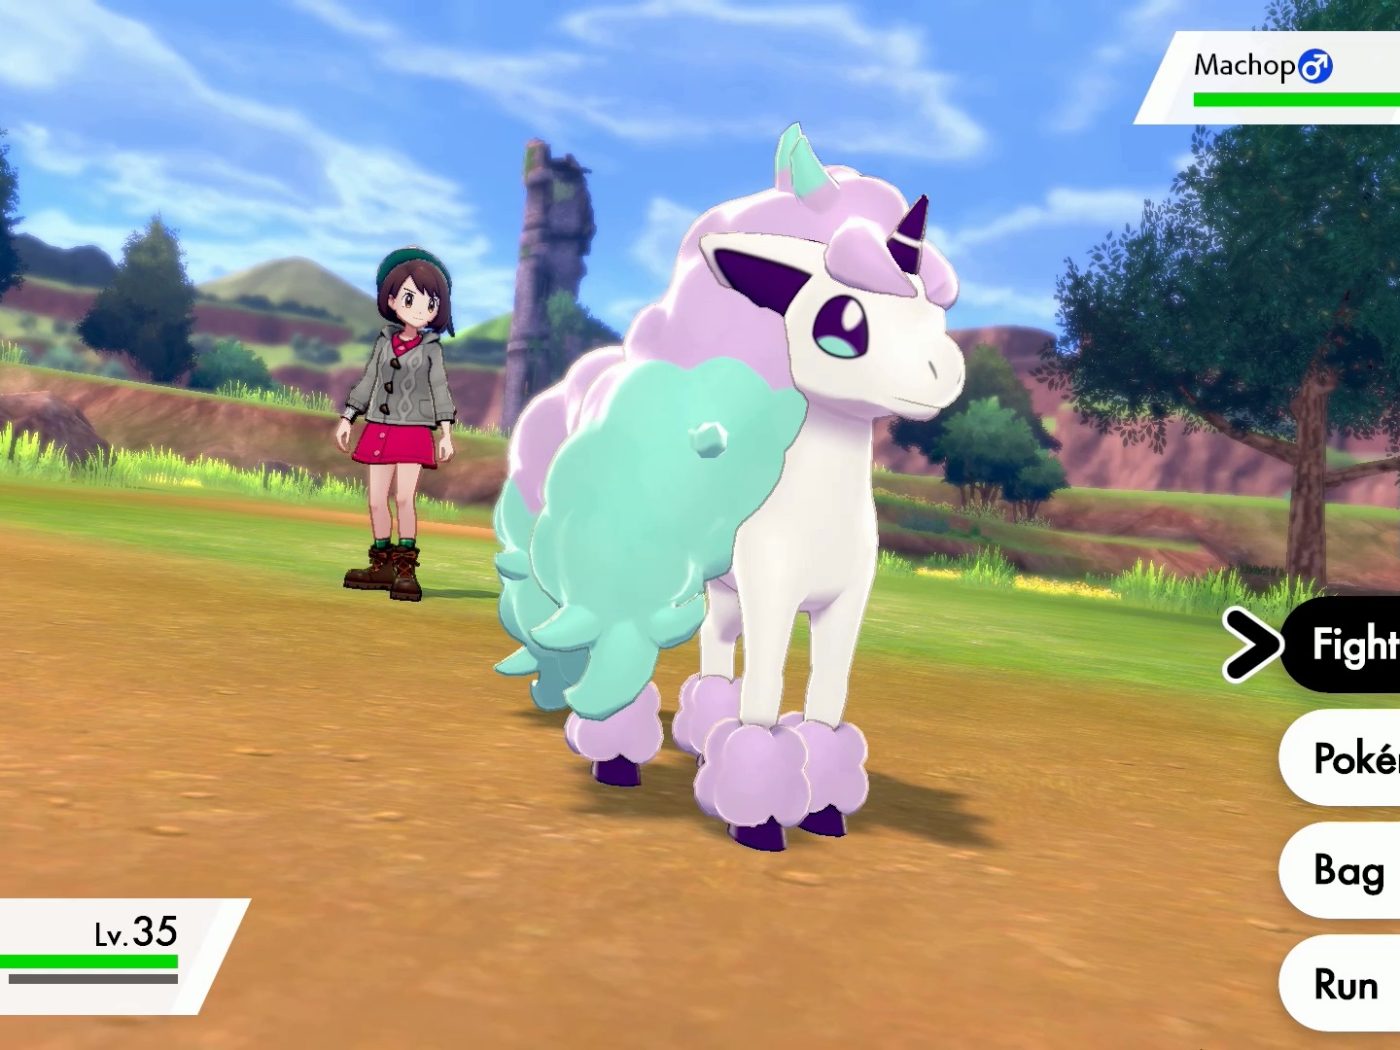 Pokémon Sword and Shield to Hit Nintendo Switch this Winter!, Game News